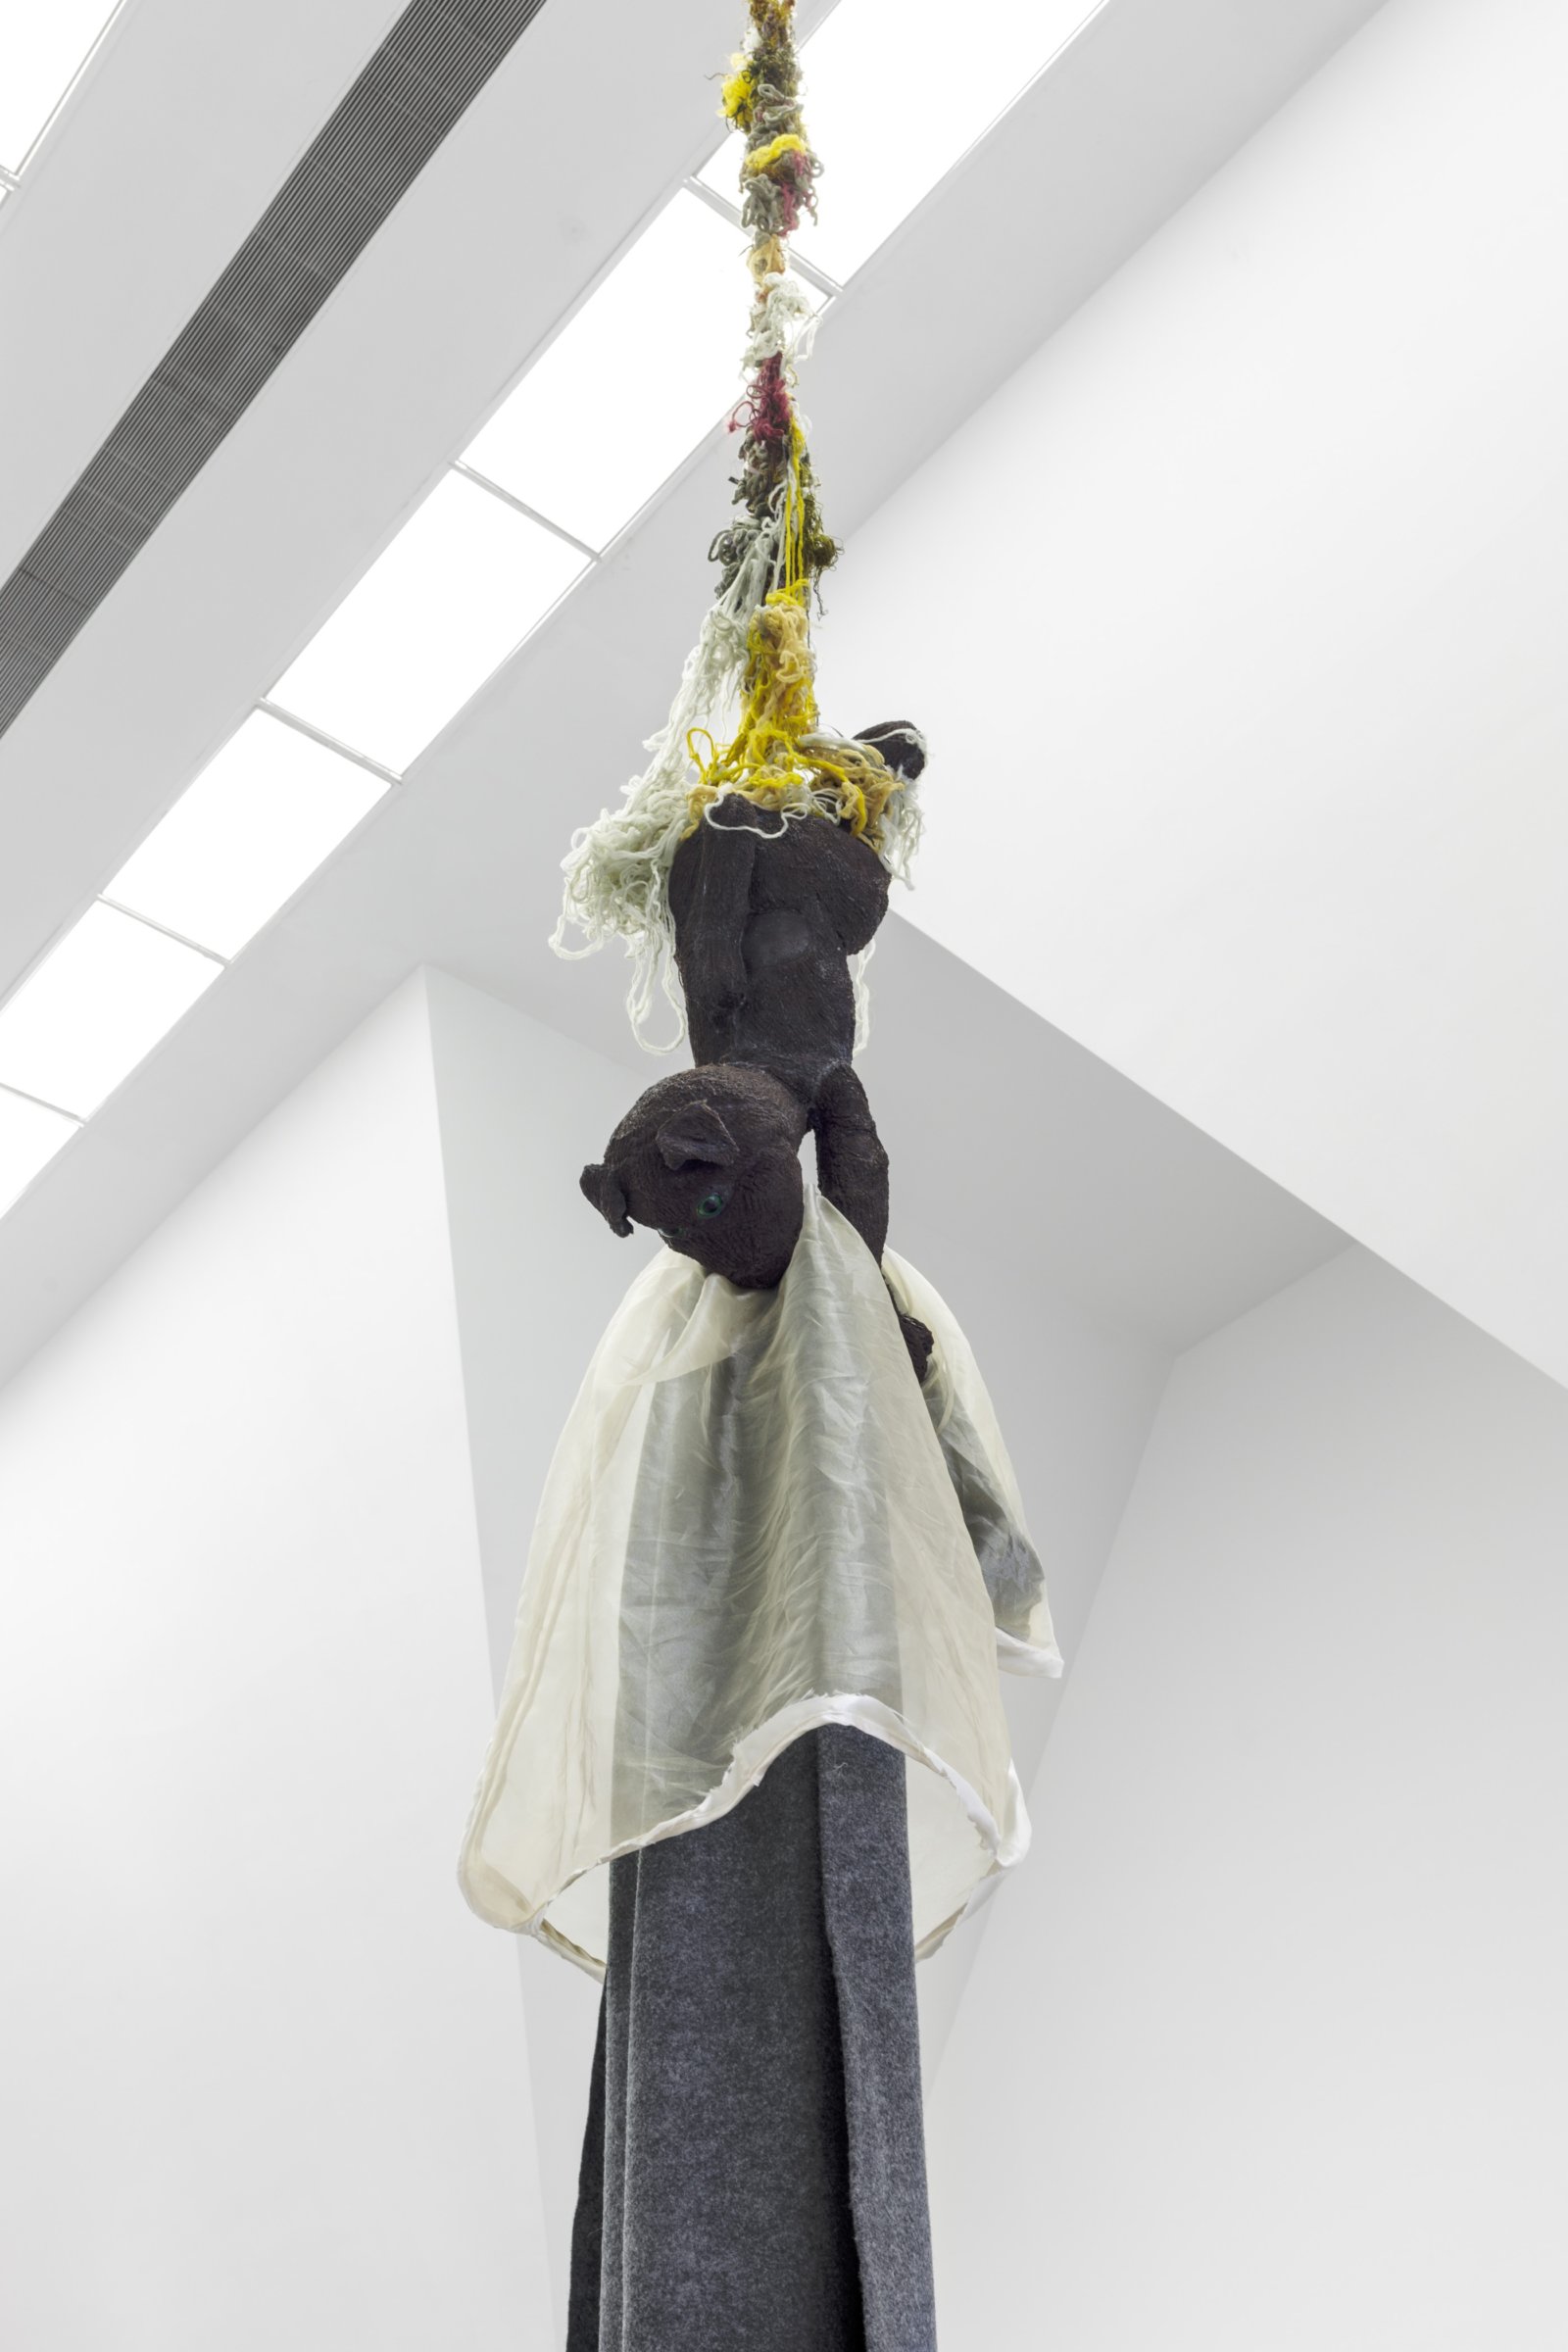 Liz Magor, Delivery (brown) (detail), 2018, silicone rubber, textiles, twine, 144 x 25 x 21 in. (366 x 62 x 52 cm). Installation view, BLOWOUT, The Renaissance Society, Chicago, USA, 2019